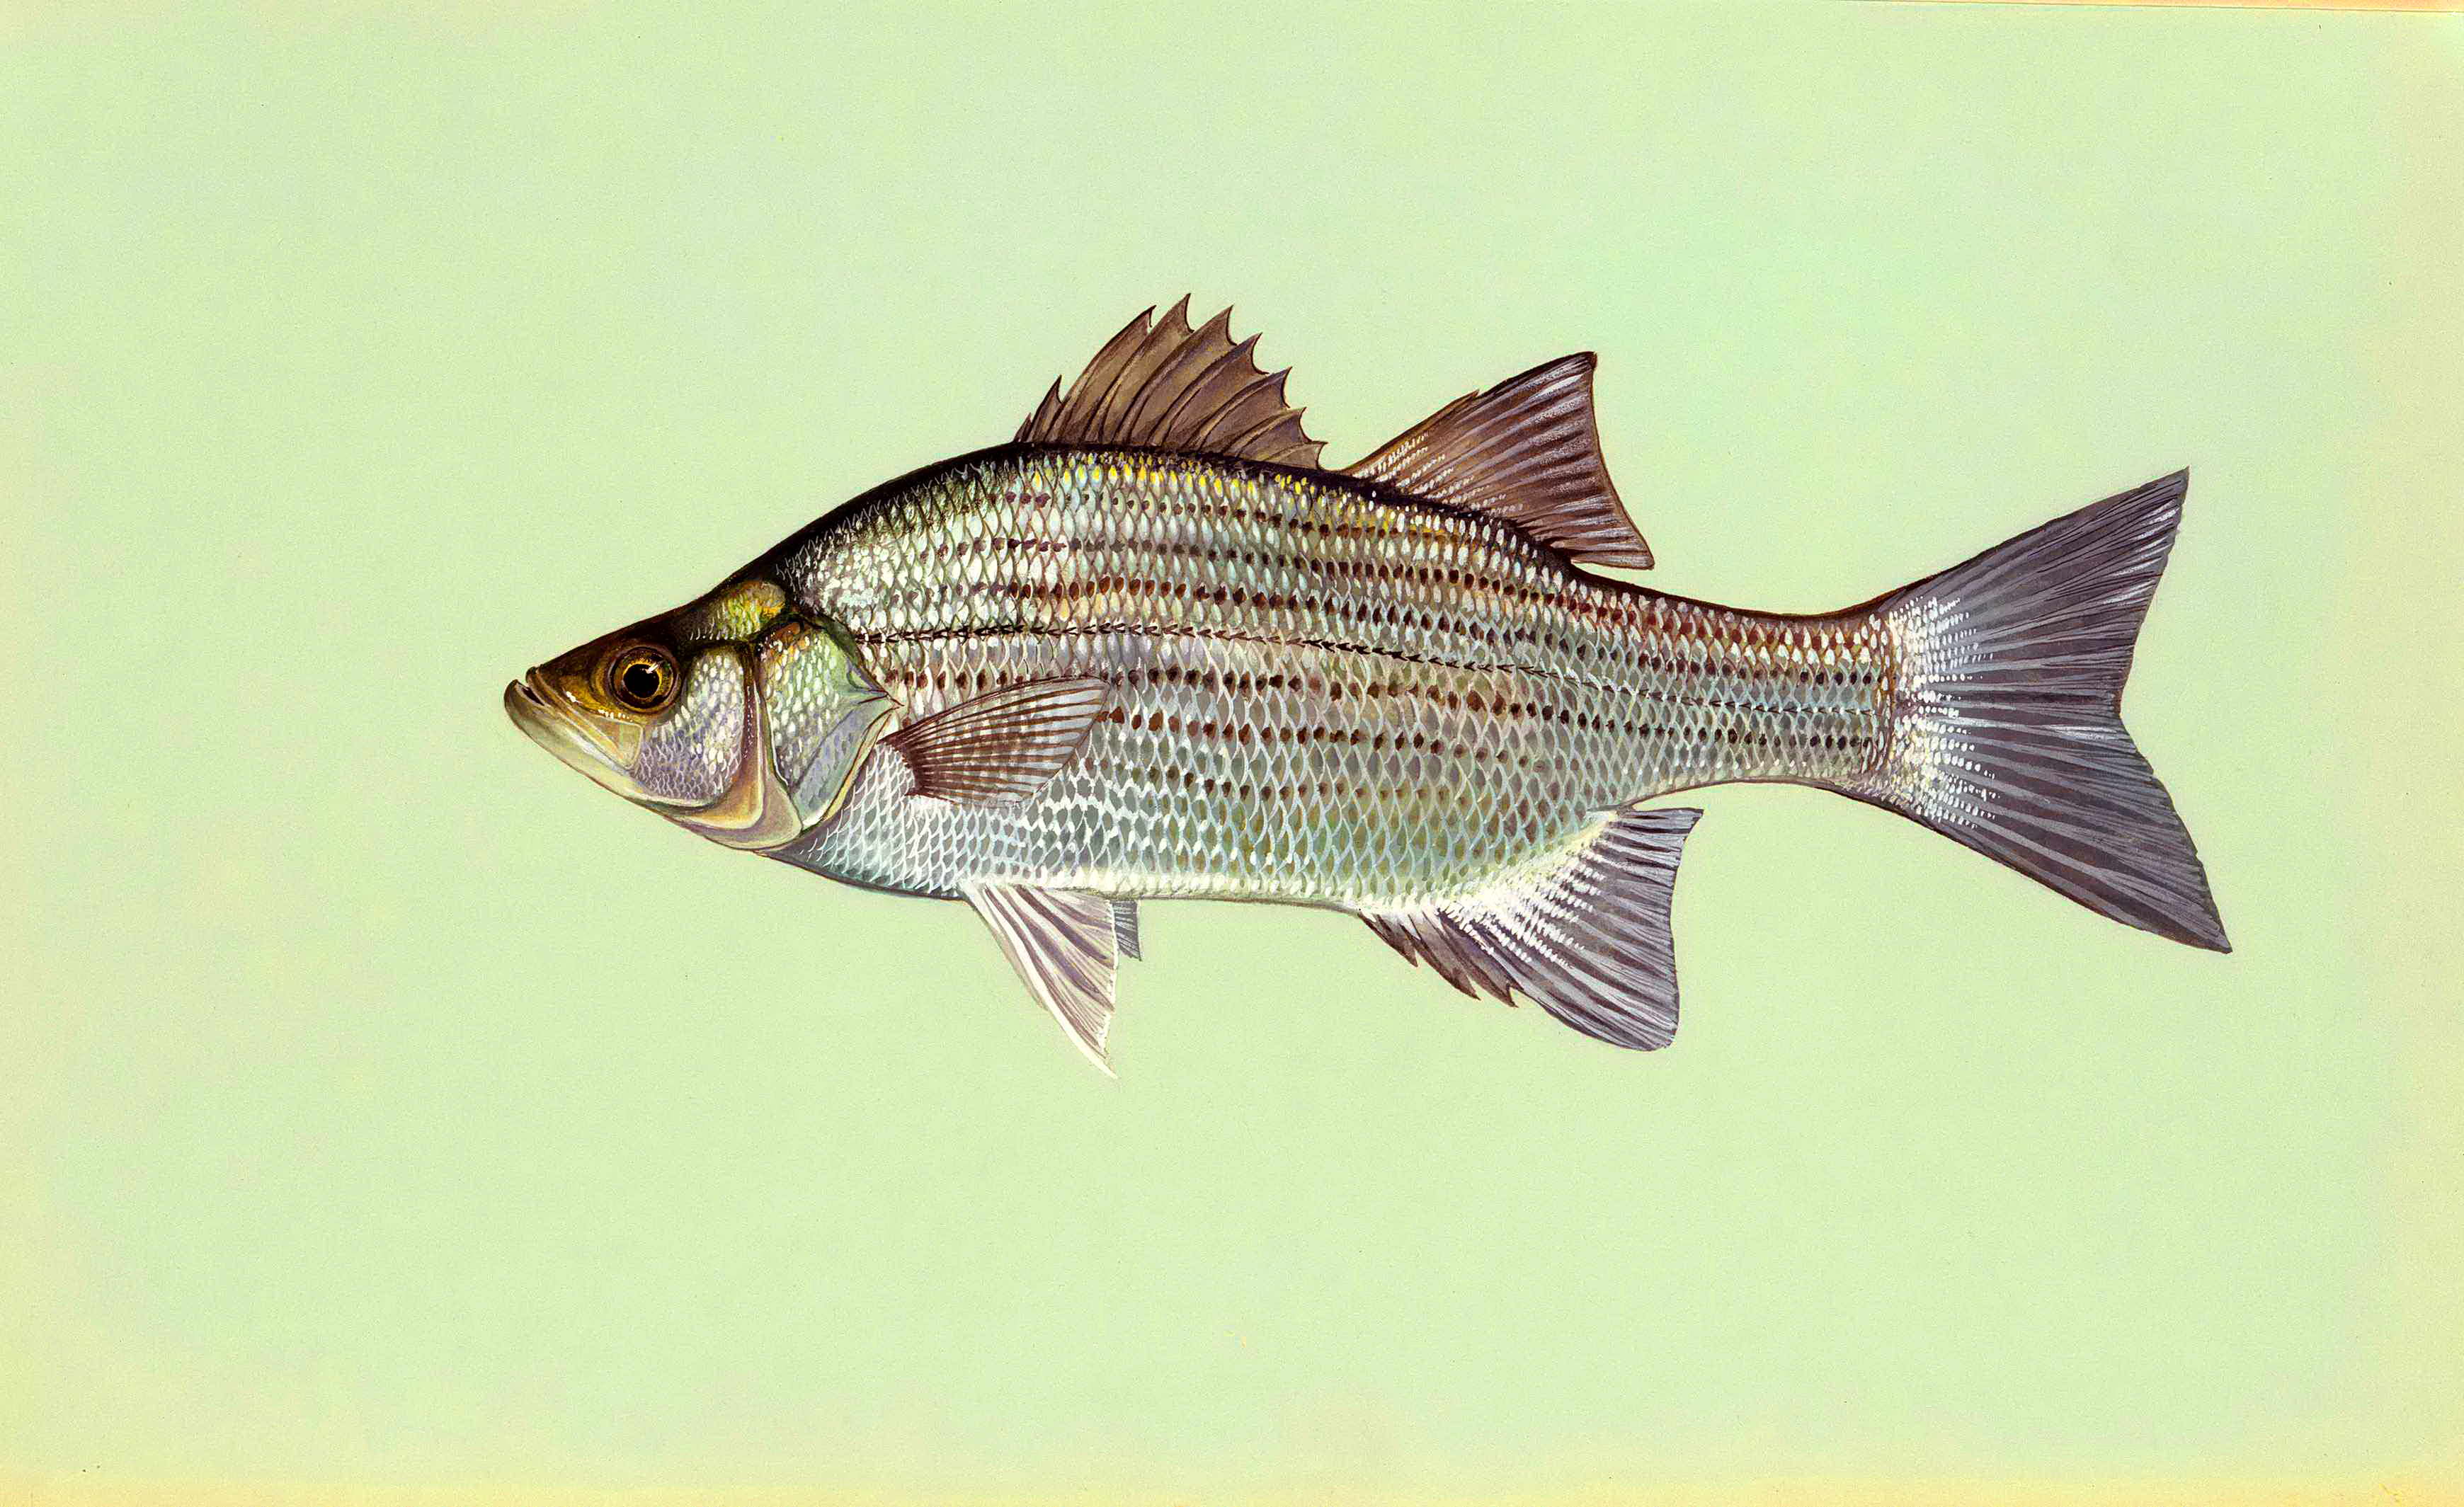 Free picture: morone chrysops, white, bass, fish.